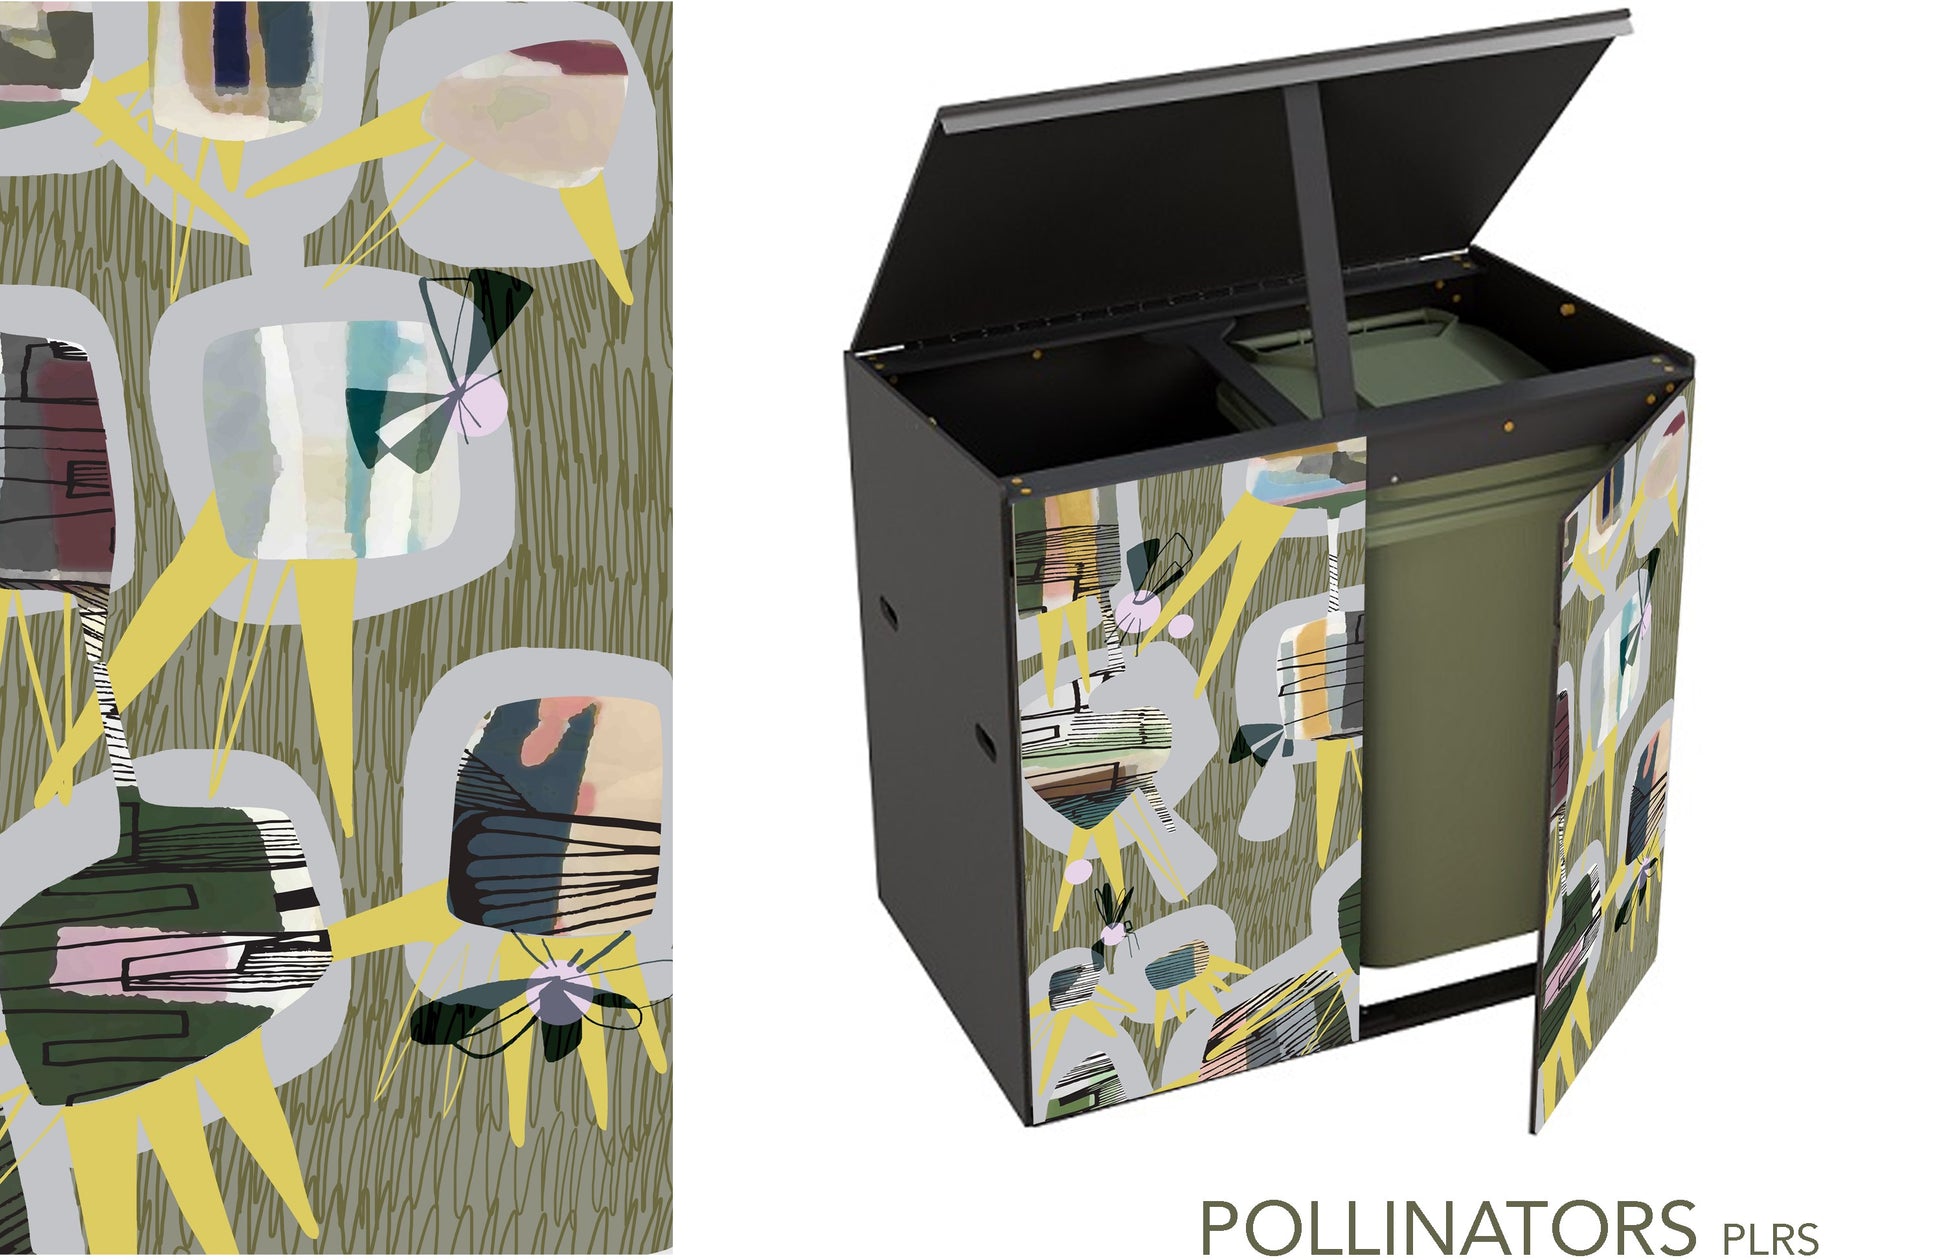 A garden storage unit with mid century style Pollinators design as described before. This time the unit has the lid propped open and one door ajar revealing a green wheelie-bin